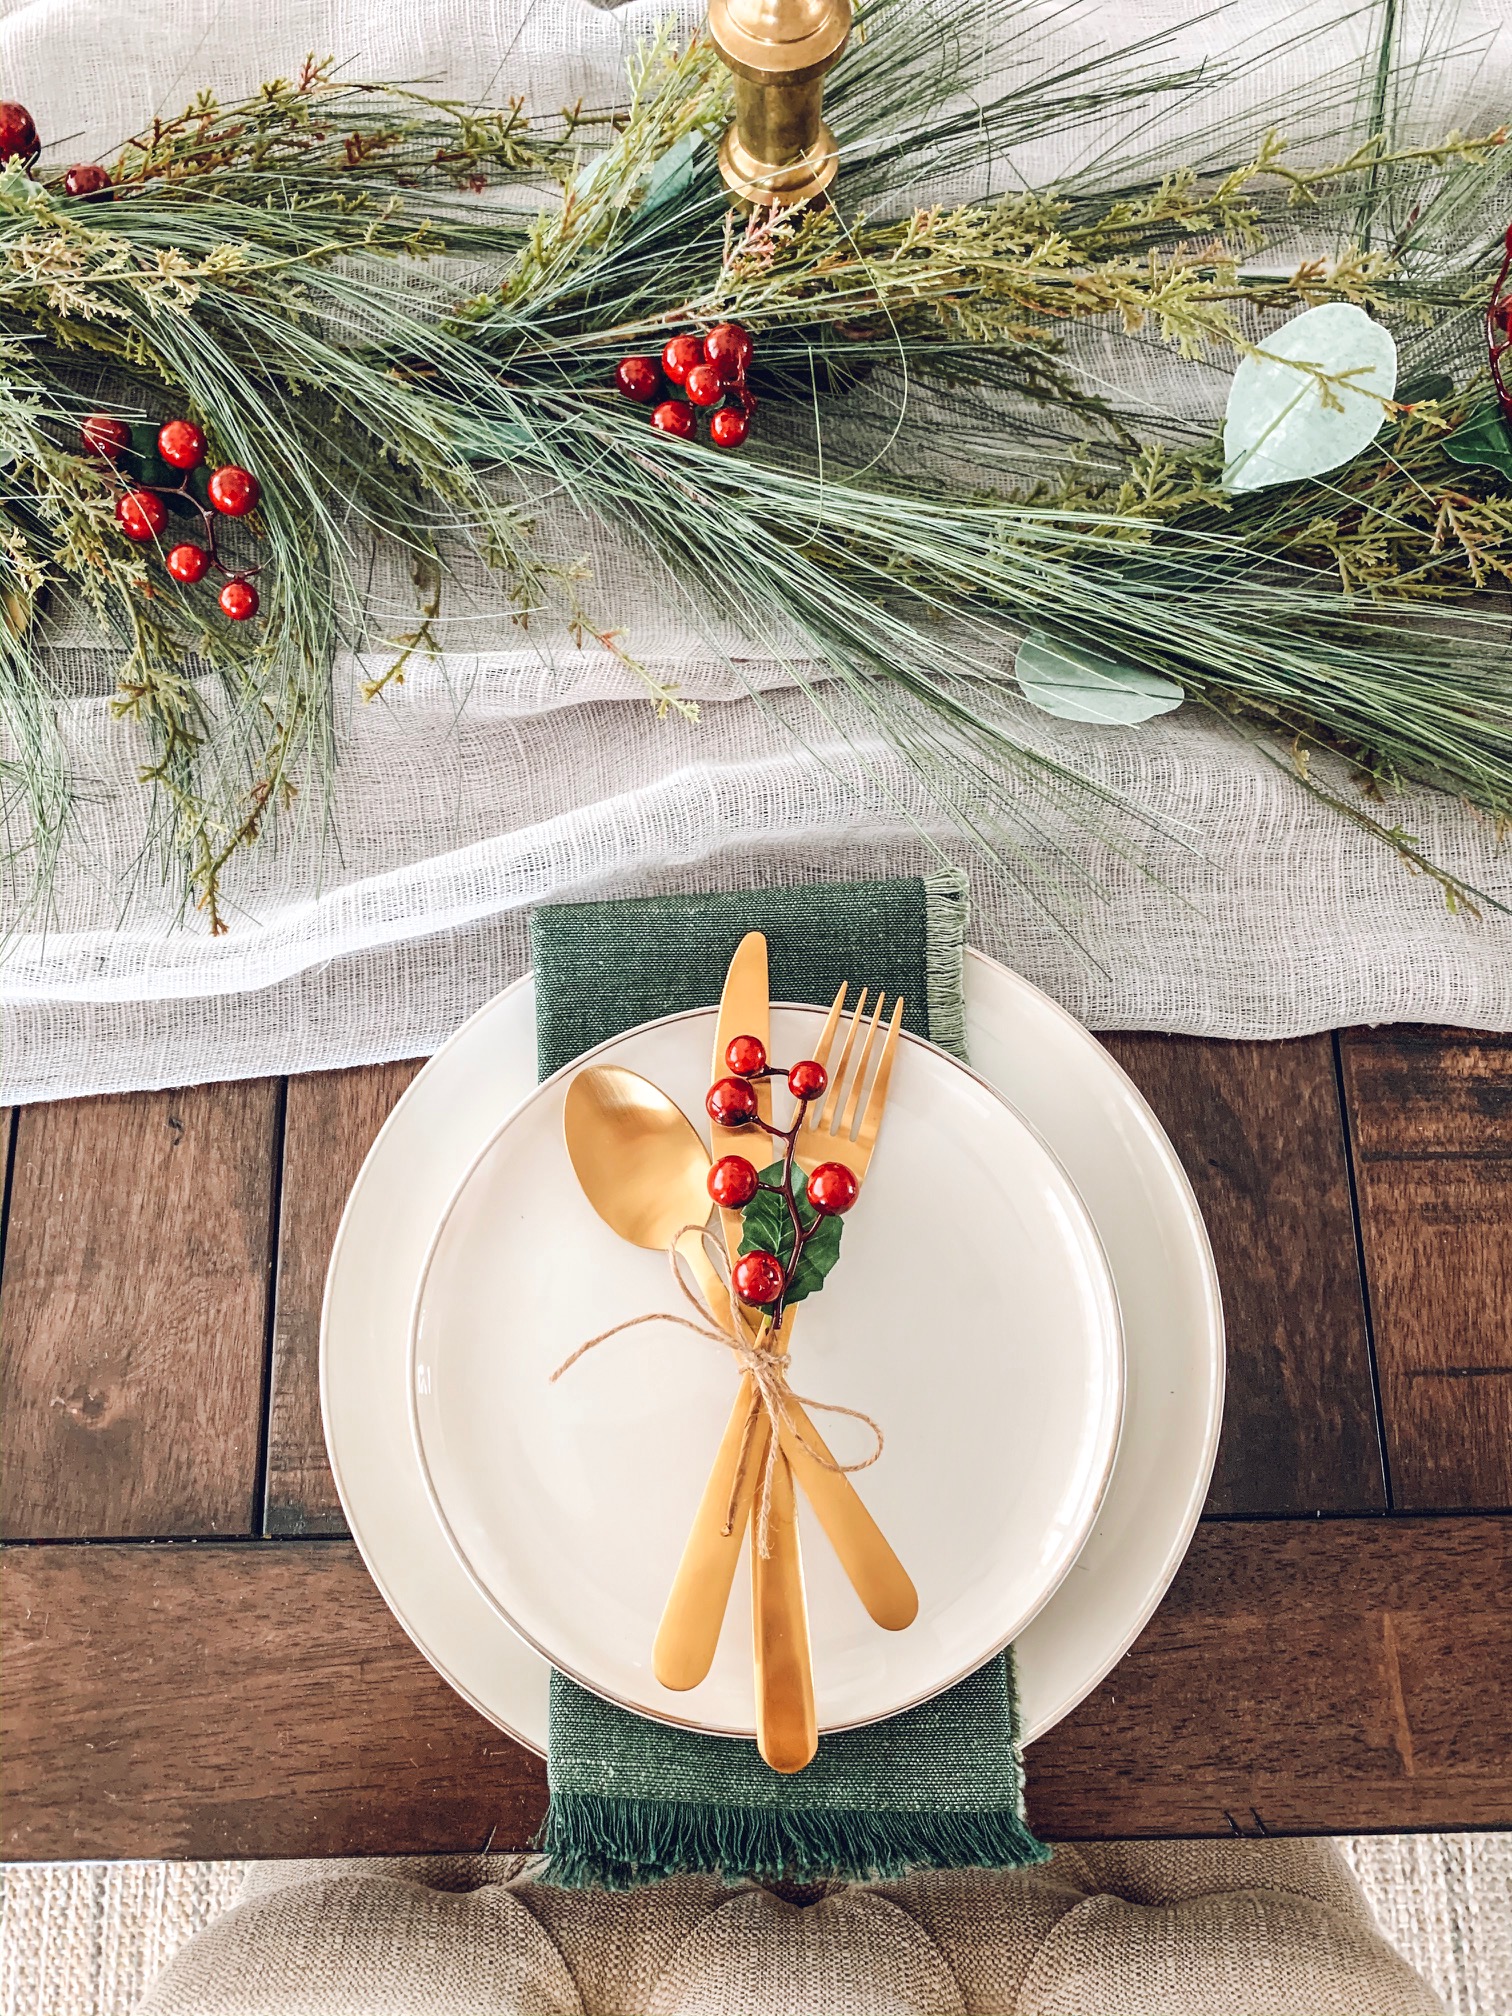 Christmas Tablescape- How To Design a Simple Centerpiece